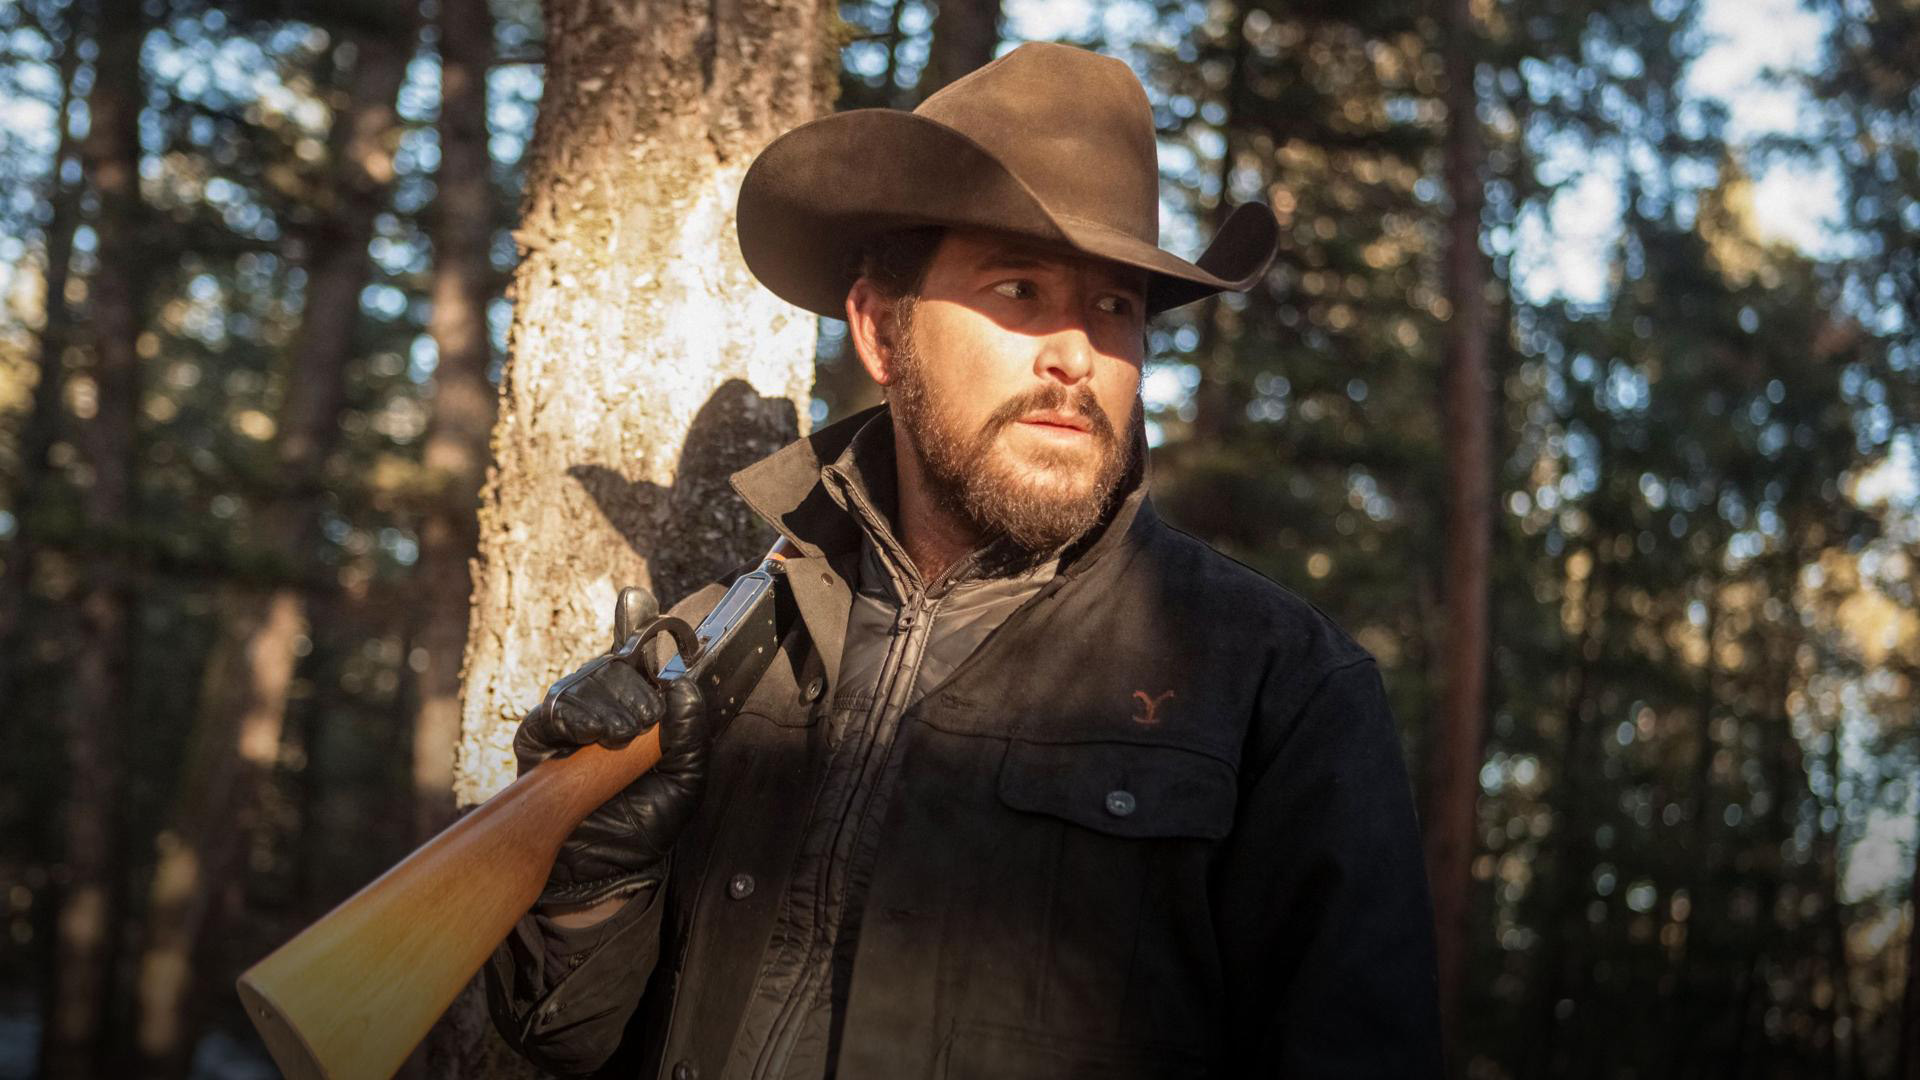 Yellowstone Star Brushes Off Cancellation Rumors as 'Drama Over Nothing'